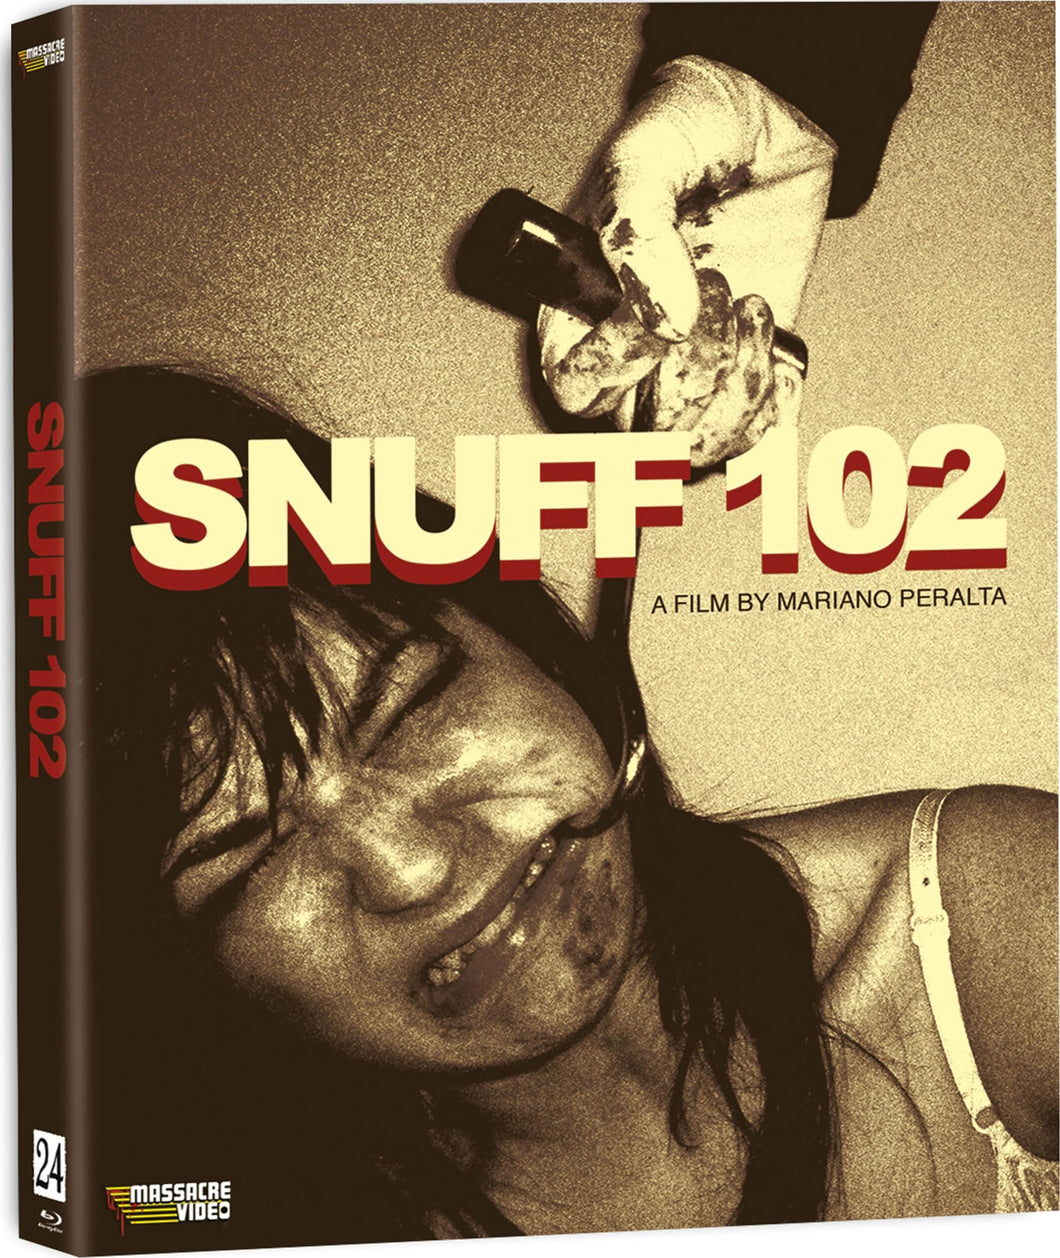 Snuff 102 (2007) - front cover